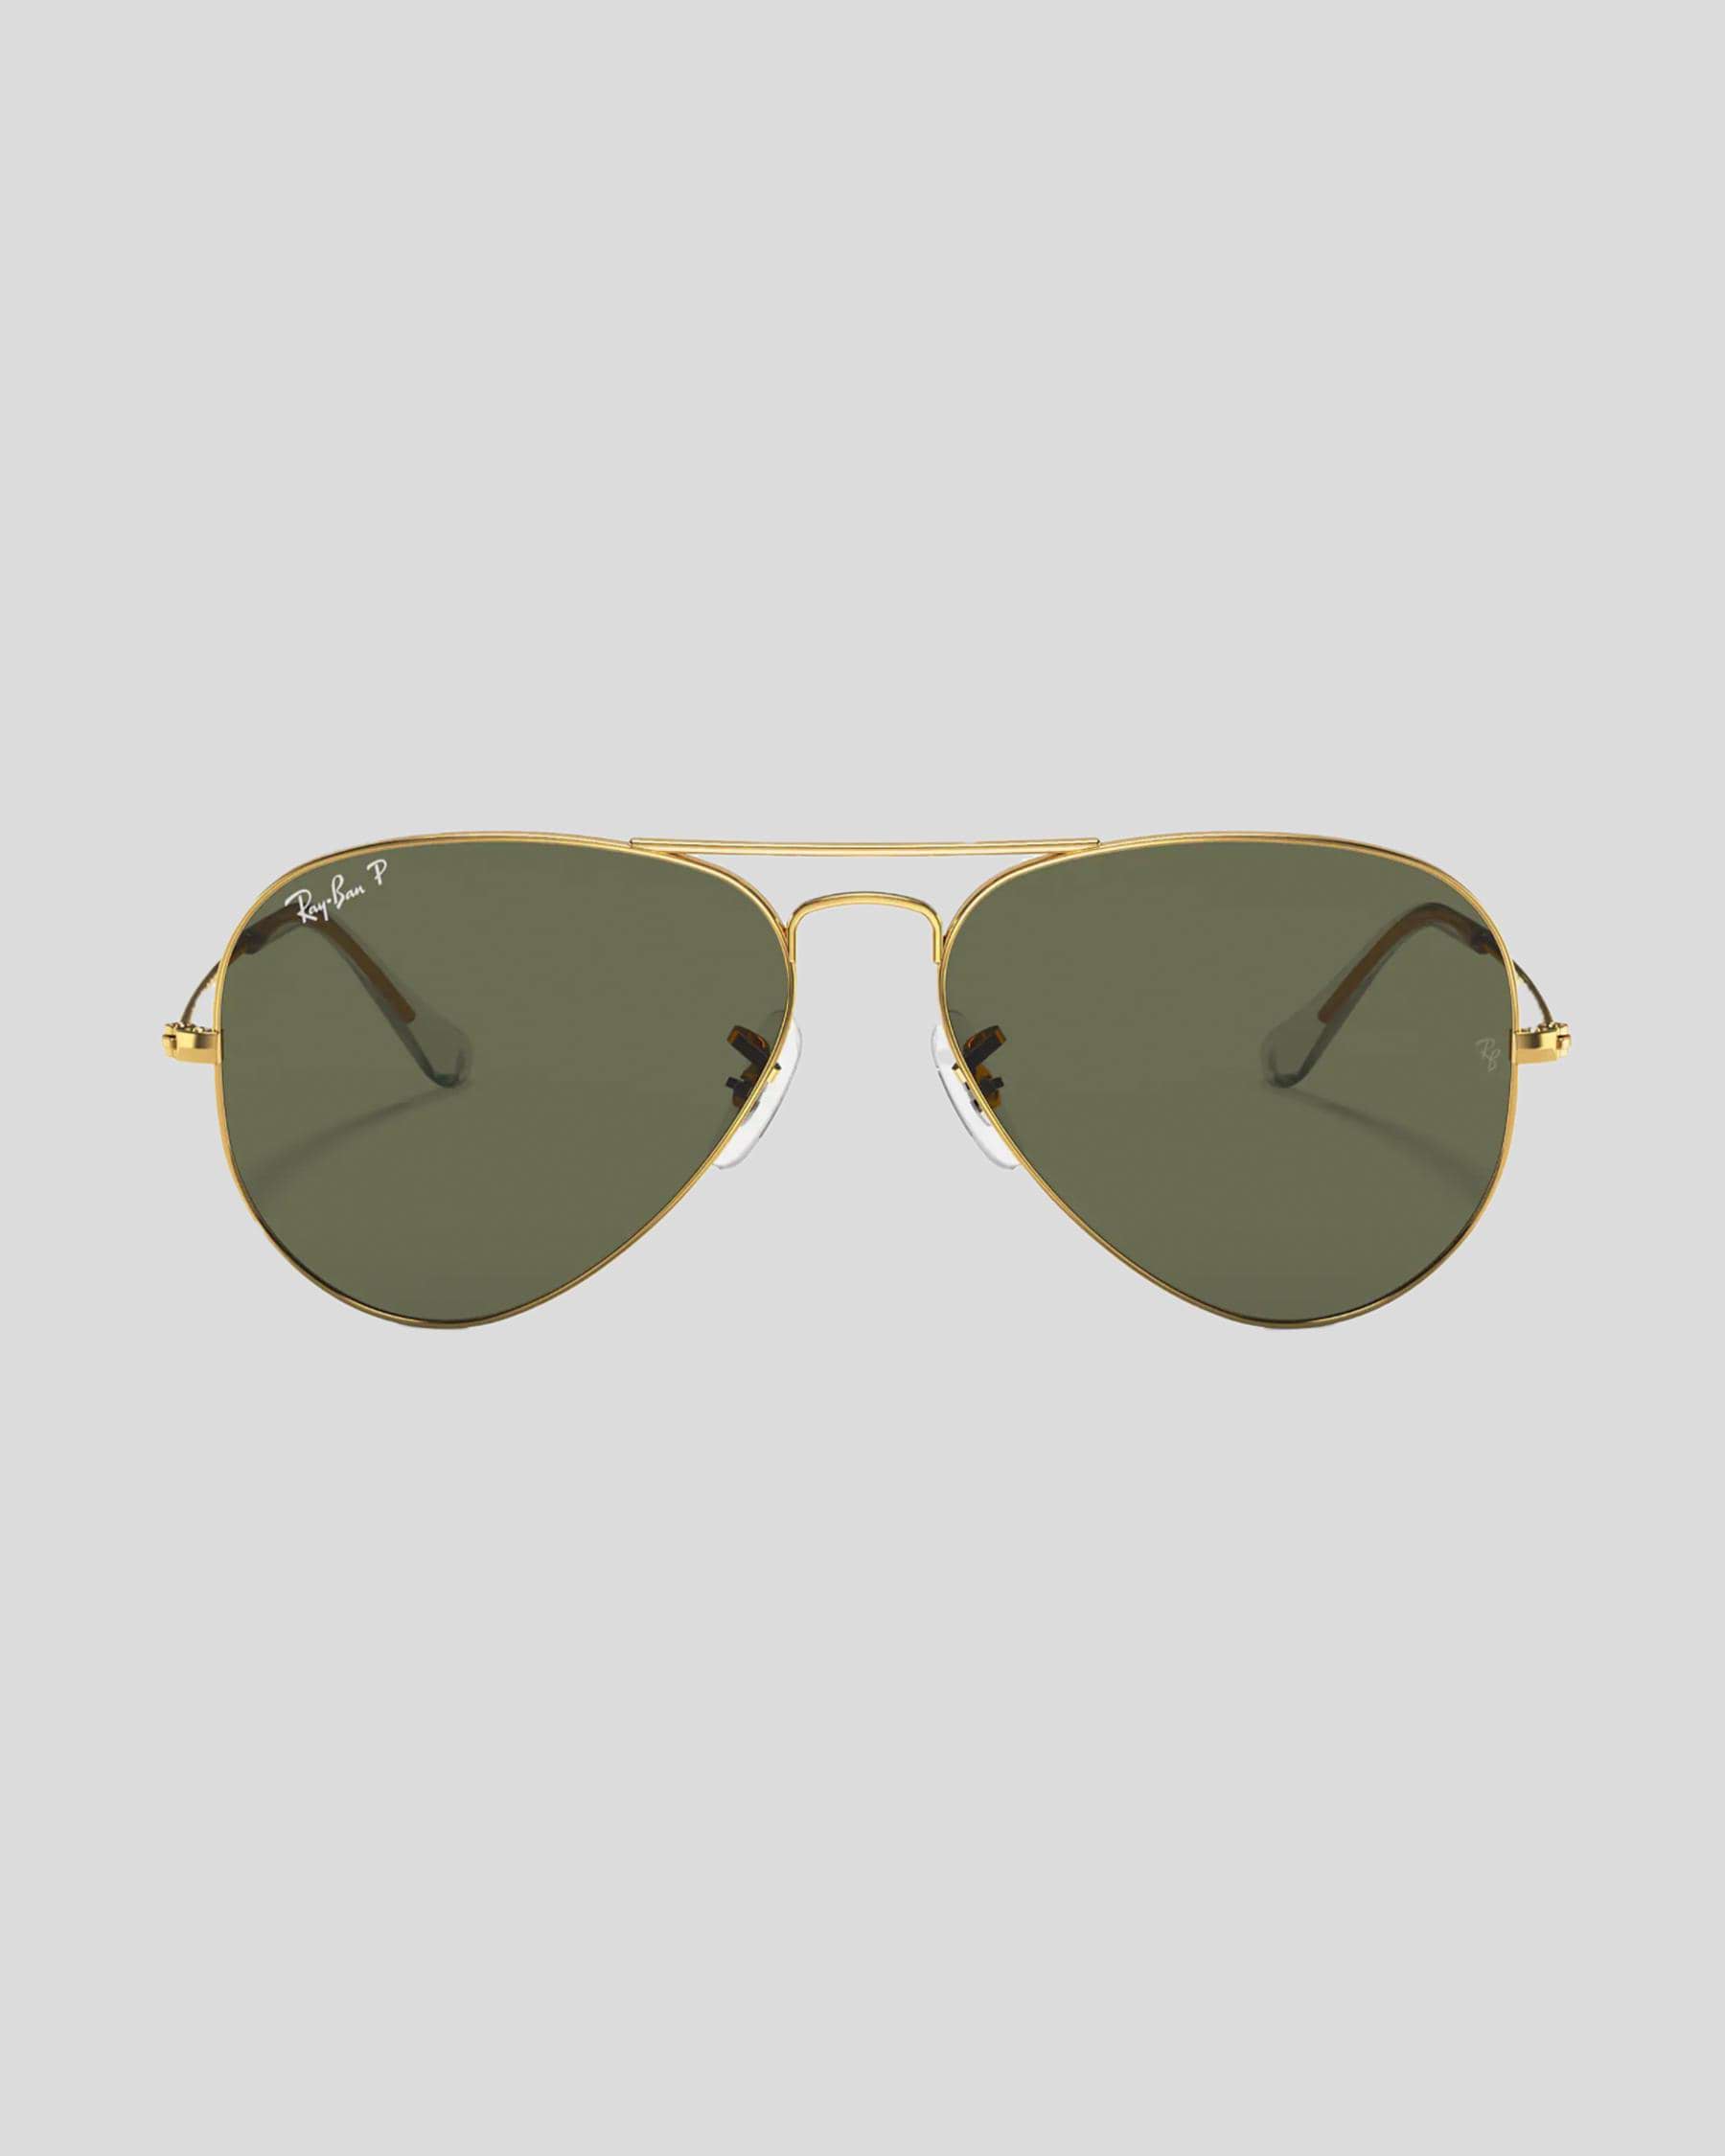 Ray-Ban Aviator Classic RB3025 Sunglasses In Gold - Fast Shipping ...